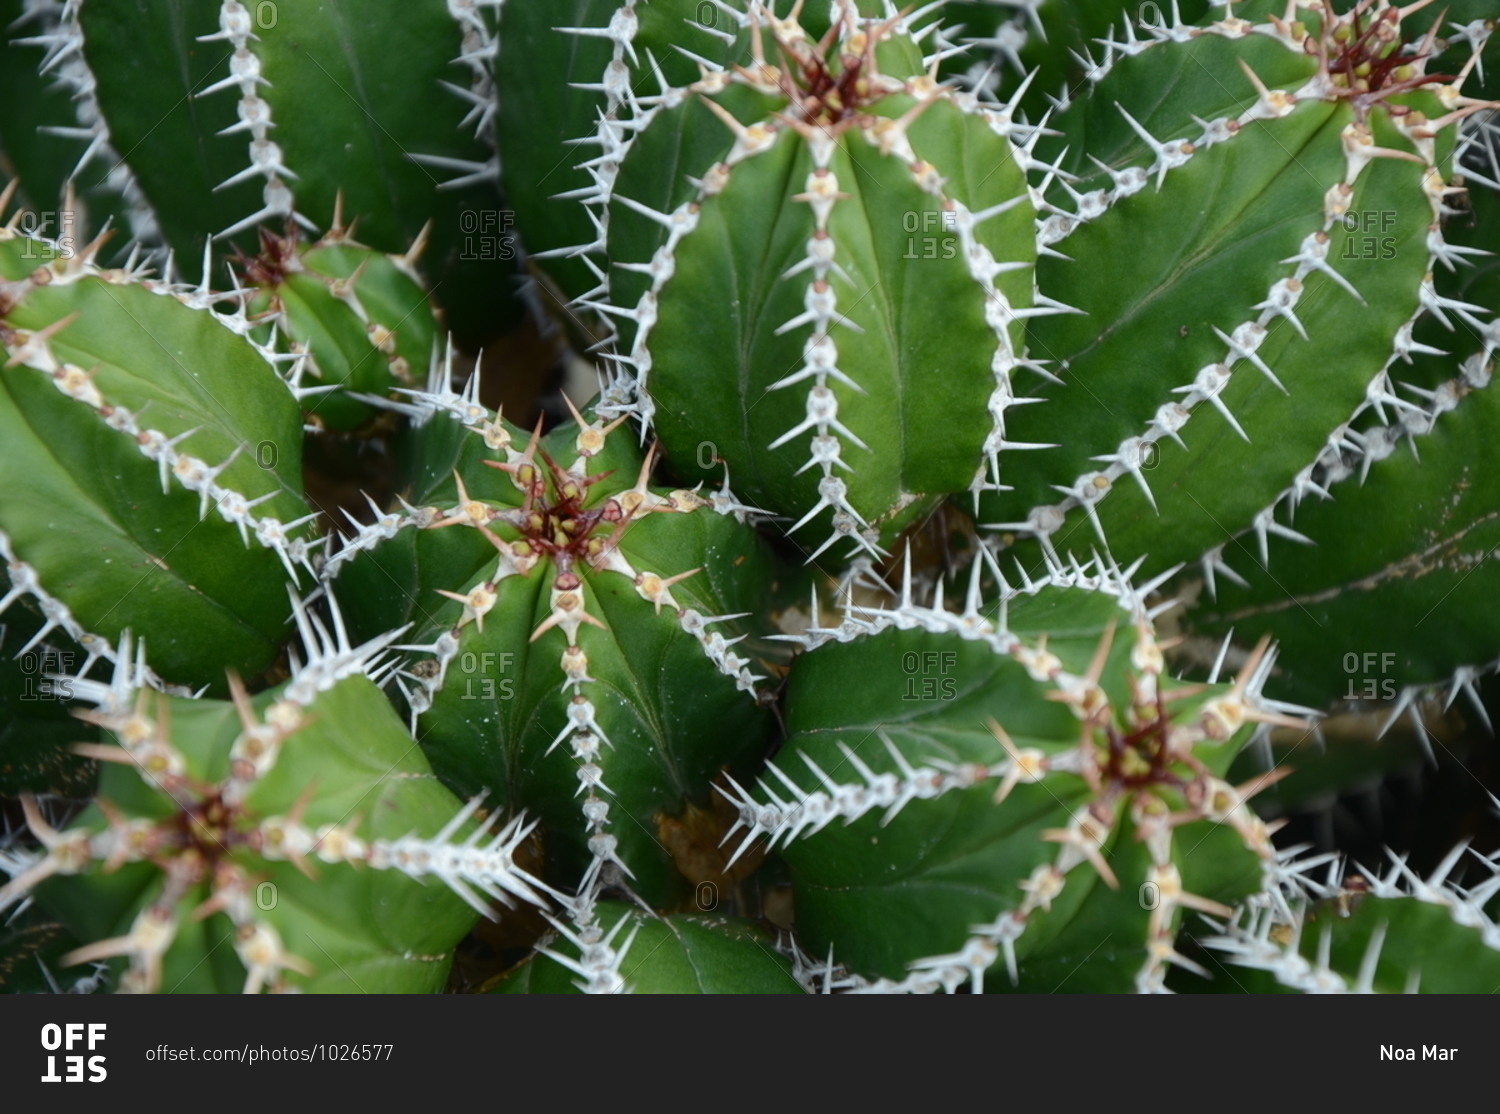 Overhead view of a cluster of green cacti